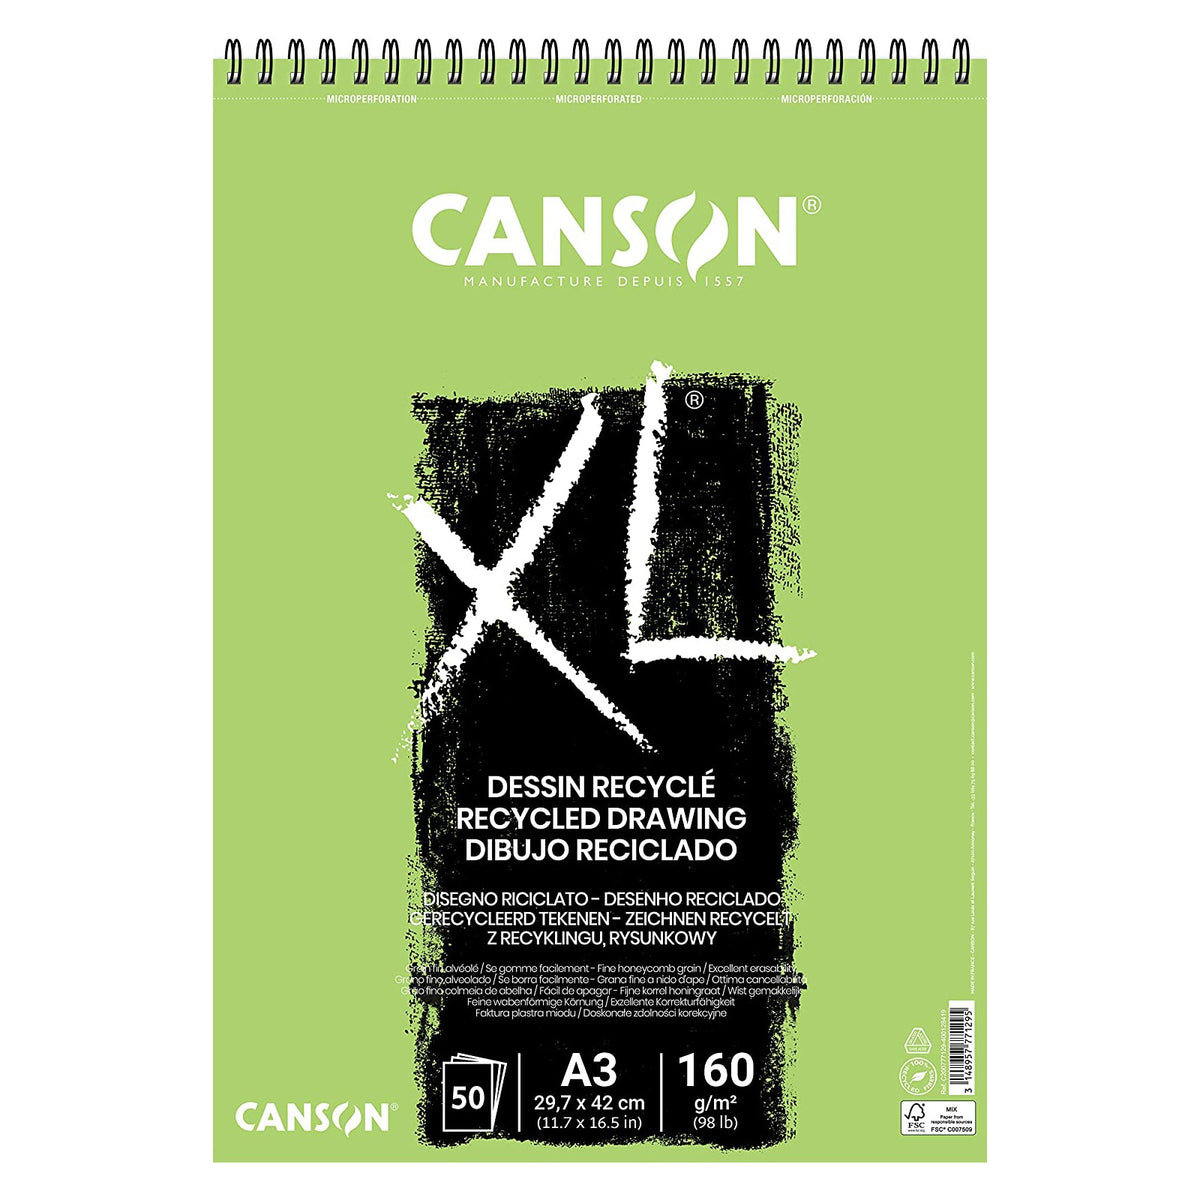 Canson Universal Heavy-Weight Side Spiral Sketchbook (Various